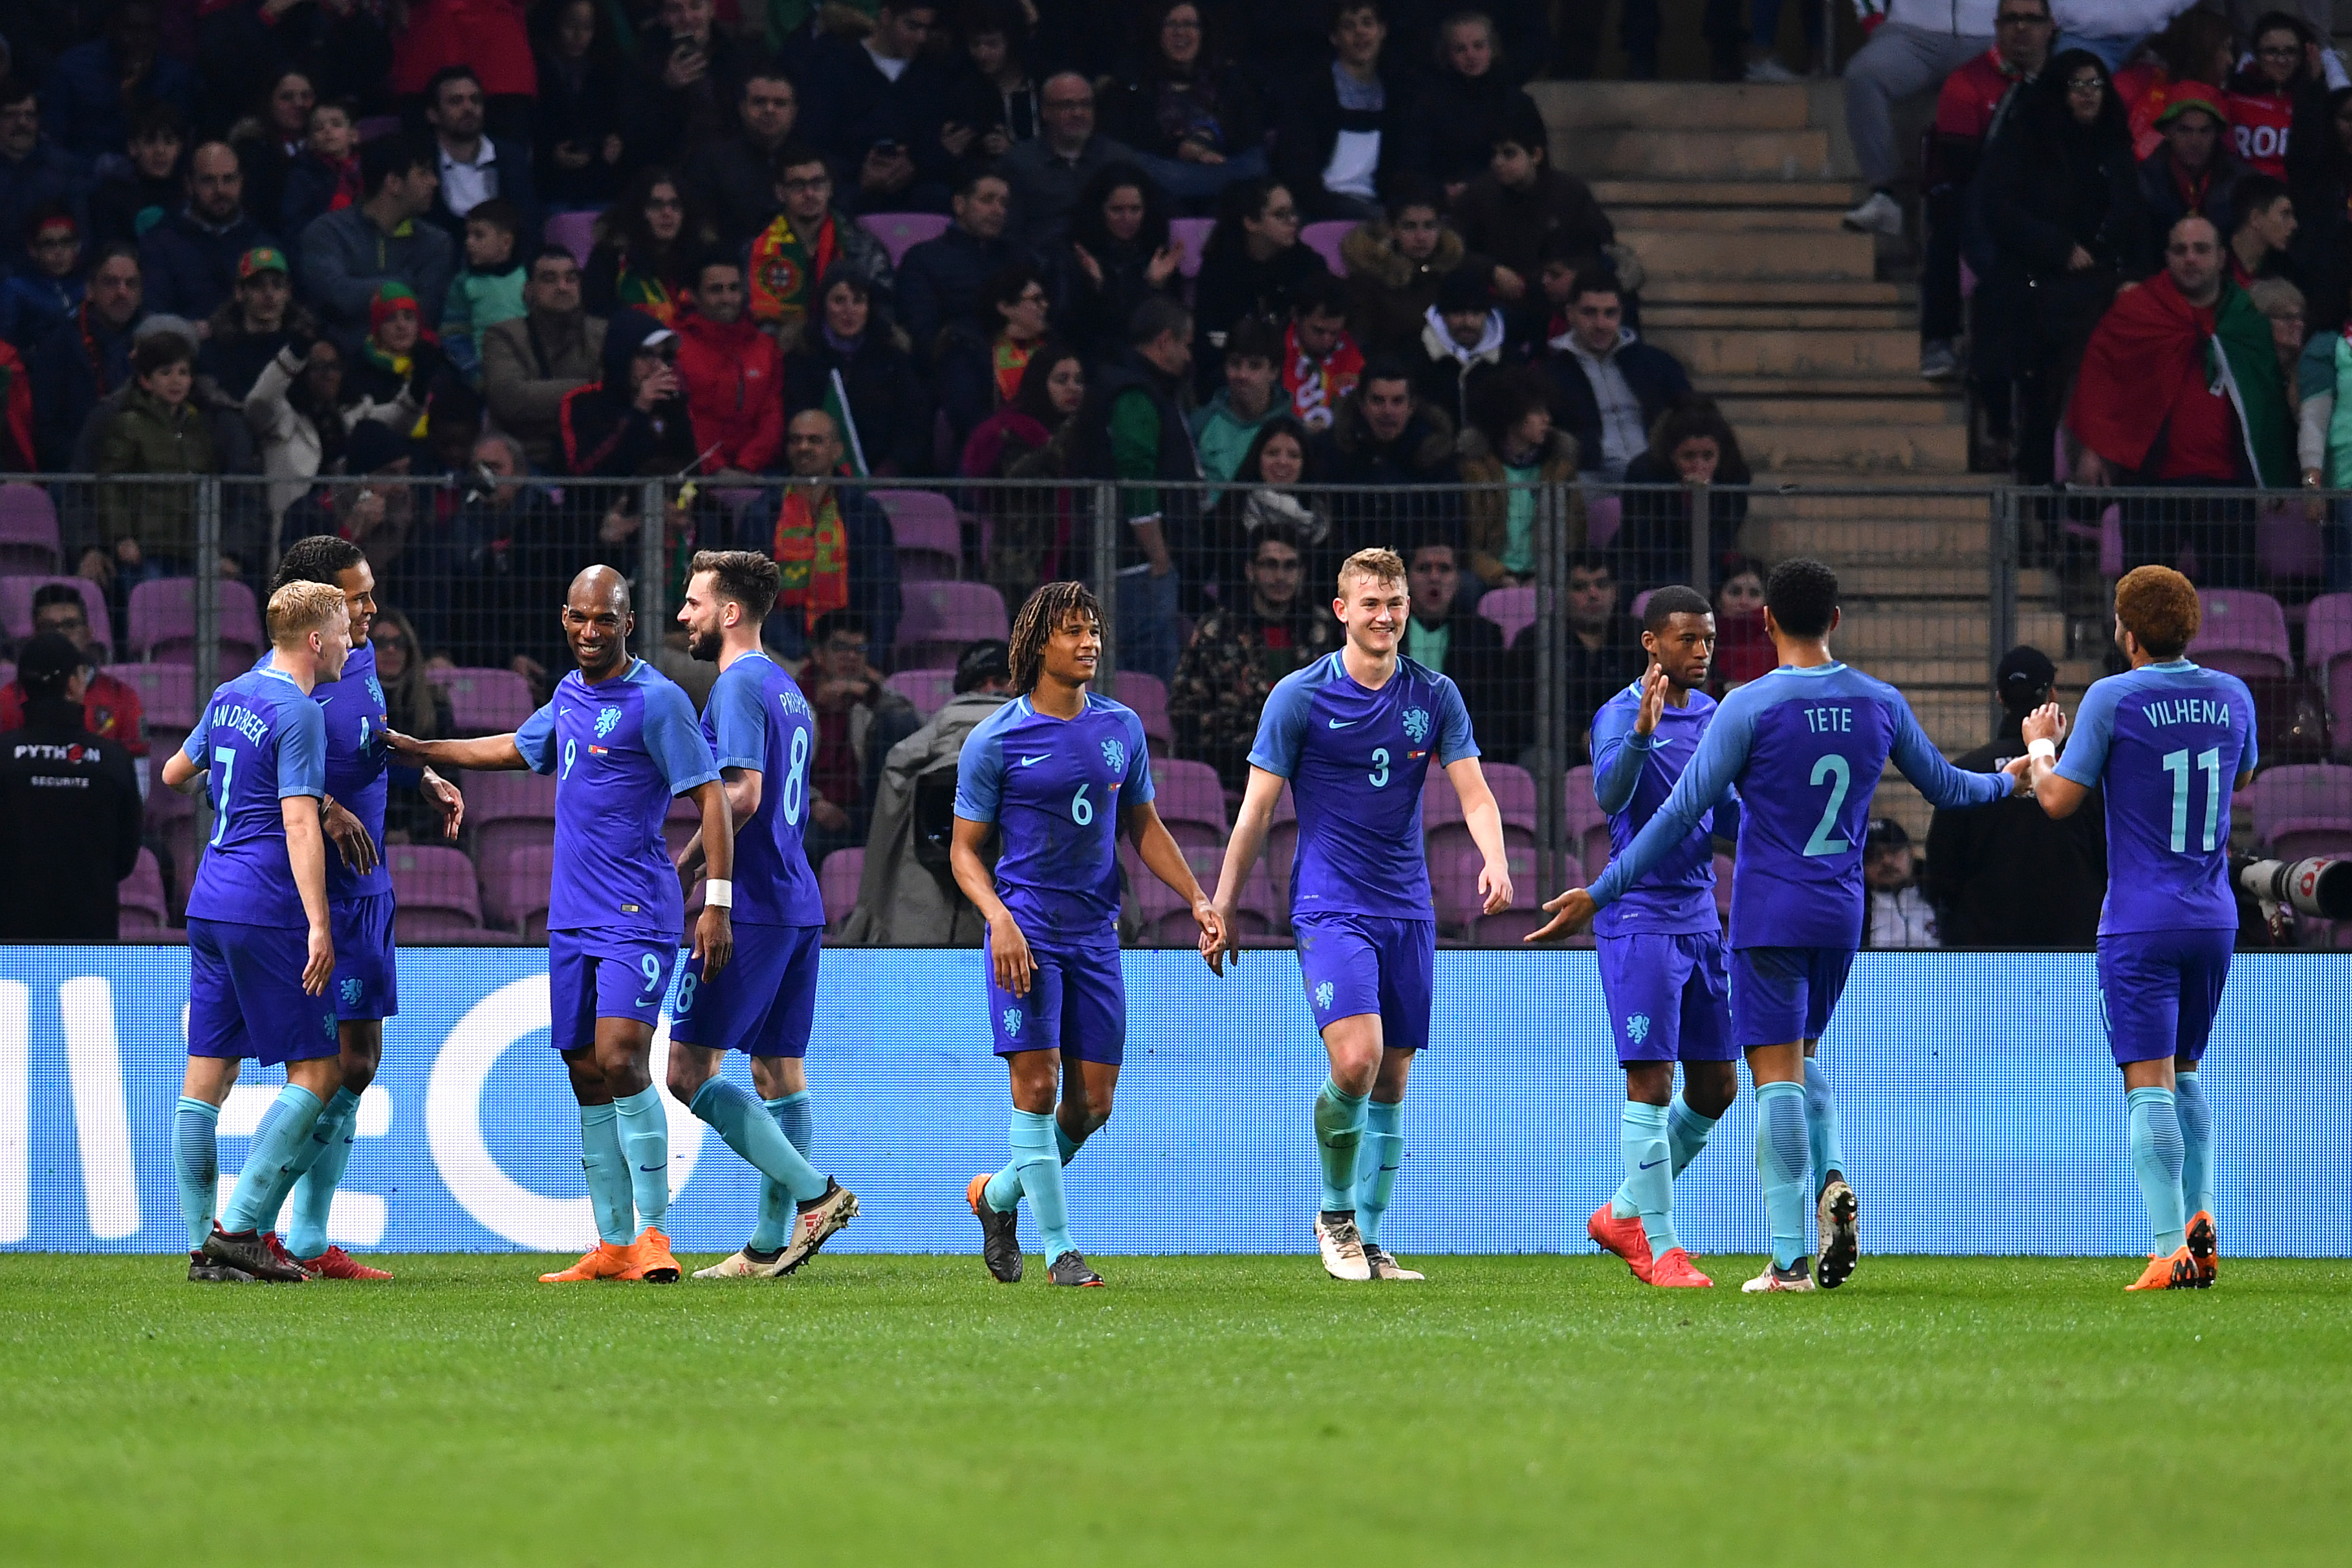 GENEVA, SWITZERLAND - MARCH 26:  Netherlands celebrate scoring their third goal during the  International Friendly match between Portugal v Netherlands at Stade de Geneve on March 26, 2018 in Geneva, Switzerland.  (Photo by Harold Cunningham/Getty Images)